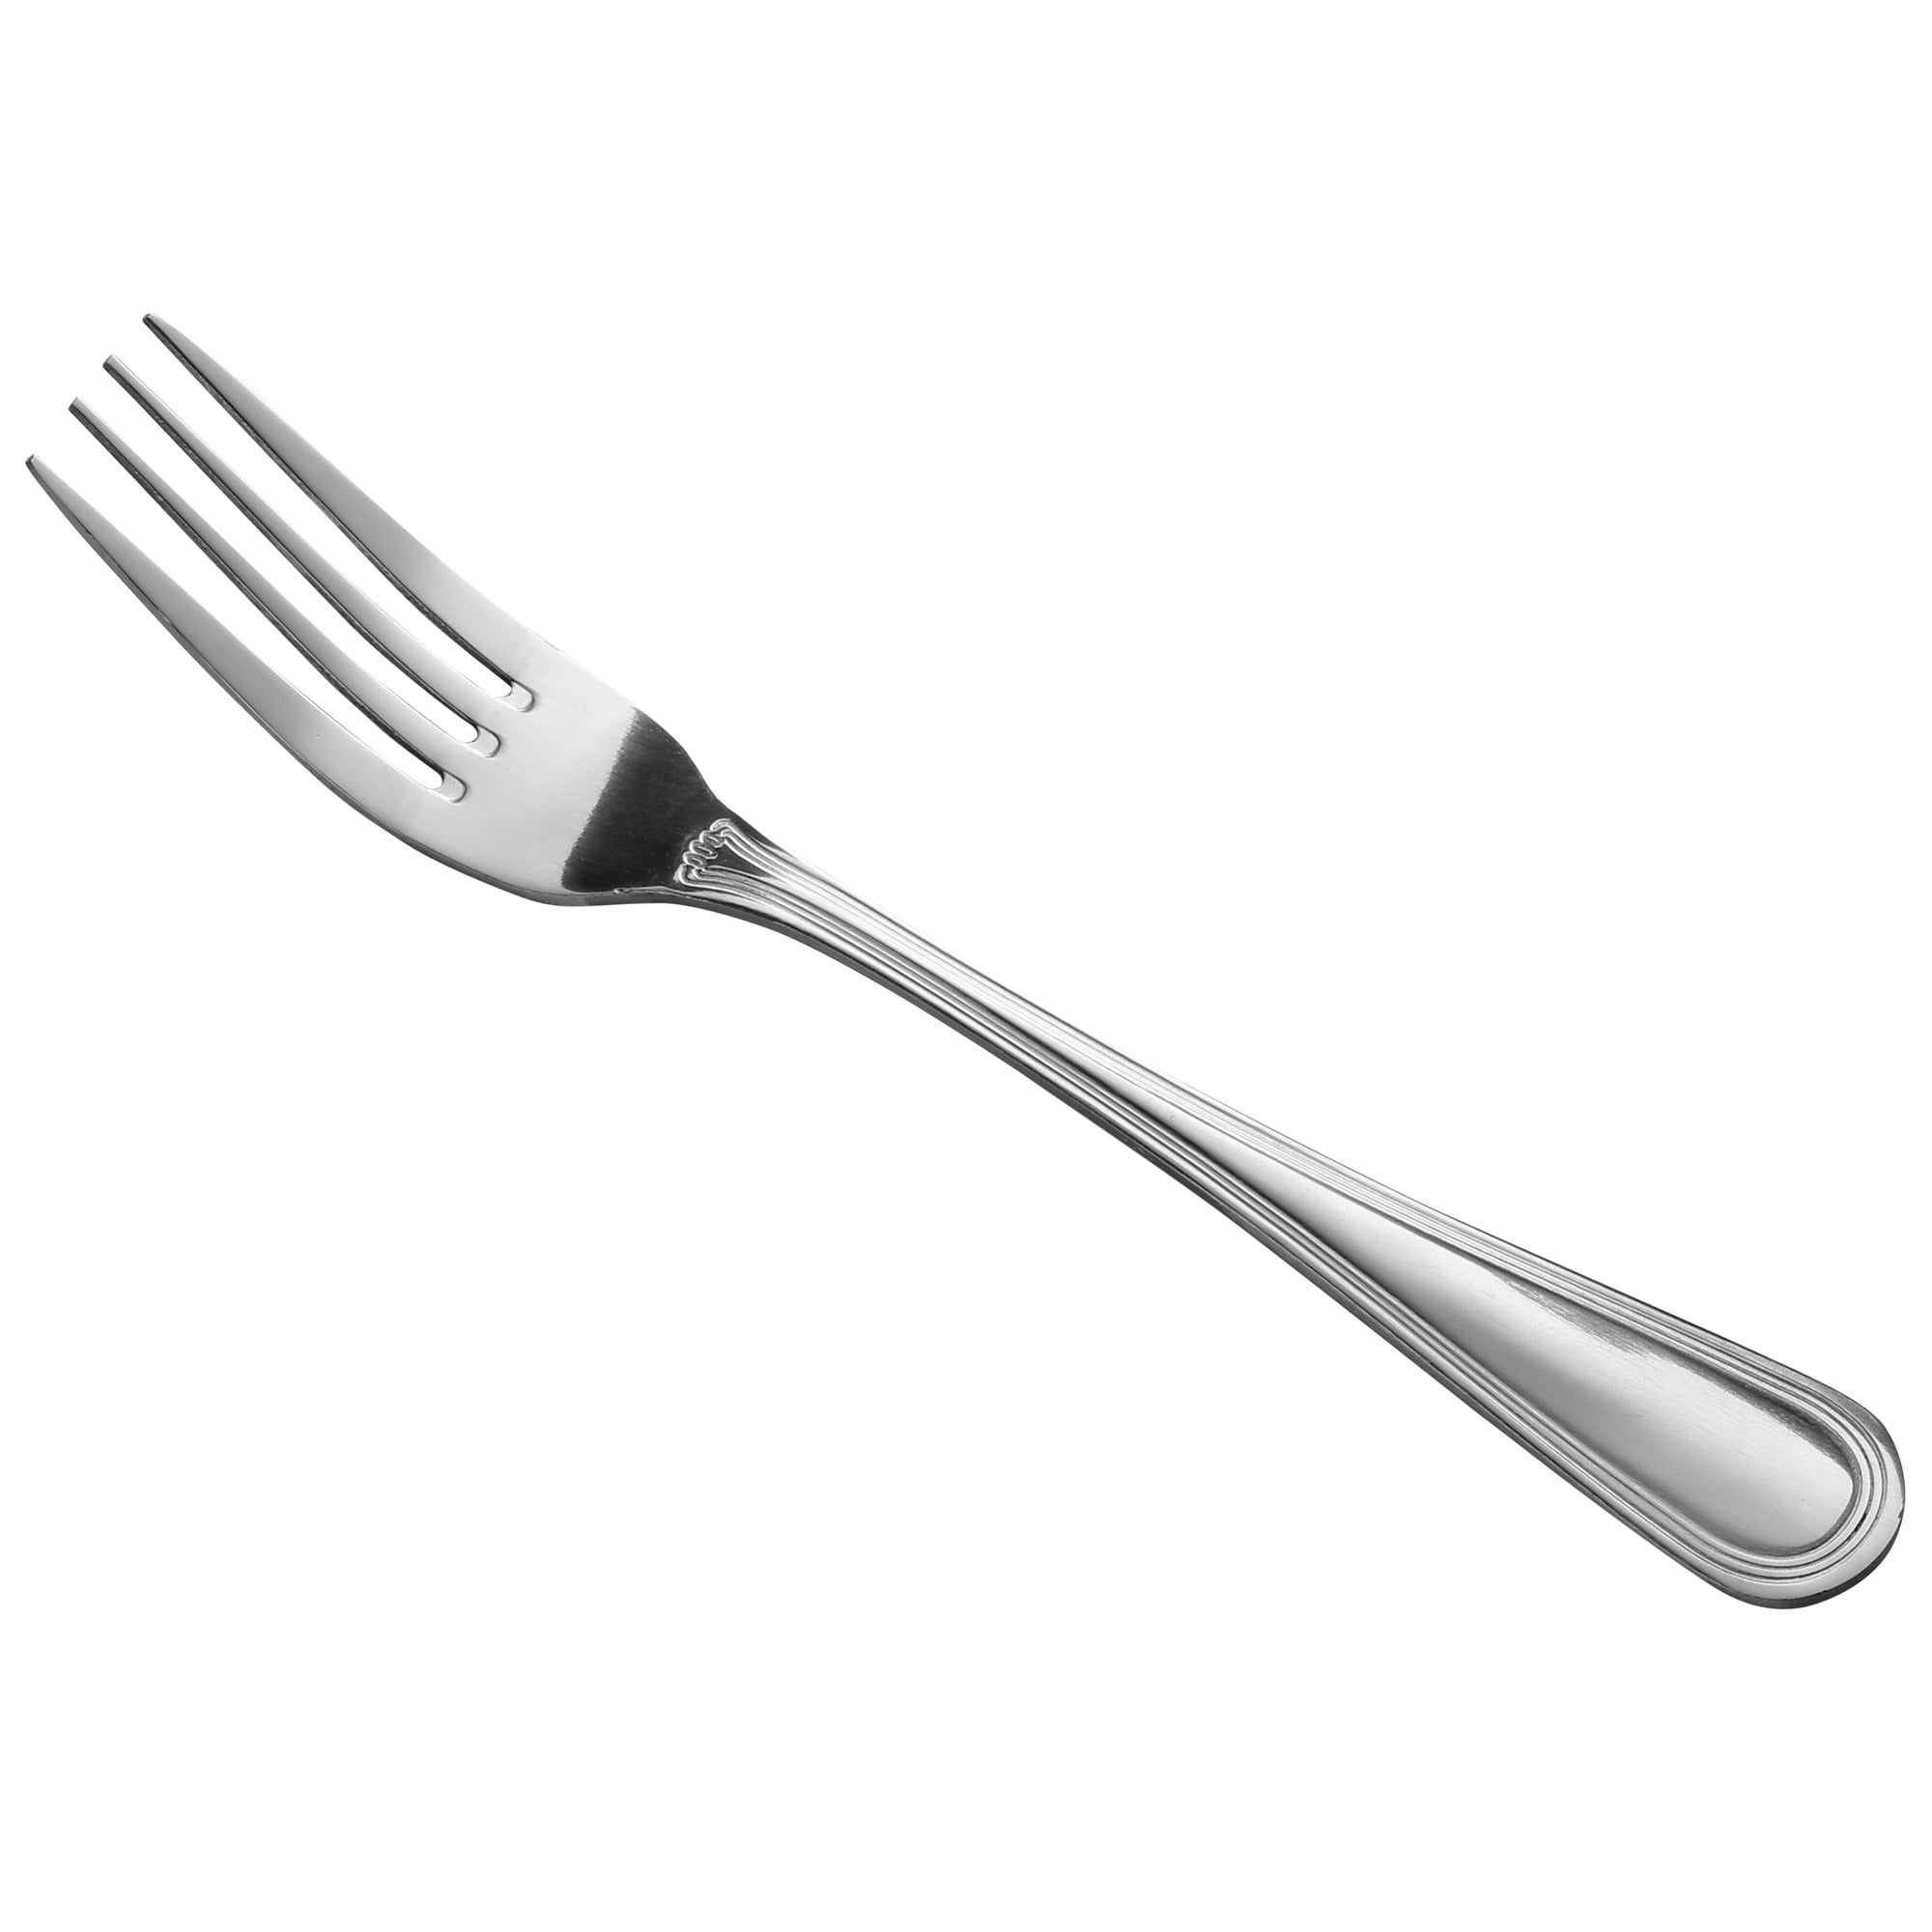 12 GENEVA DINNER FORKS HEAVY WEIGHT BY BRANDWARE FREE SHIPPING USA ONLY 